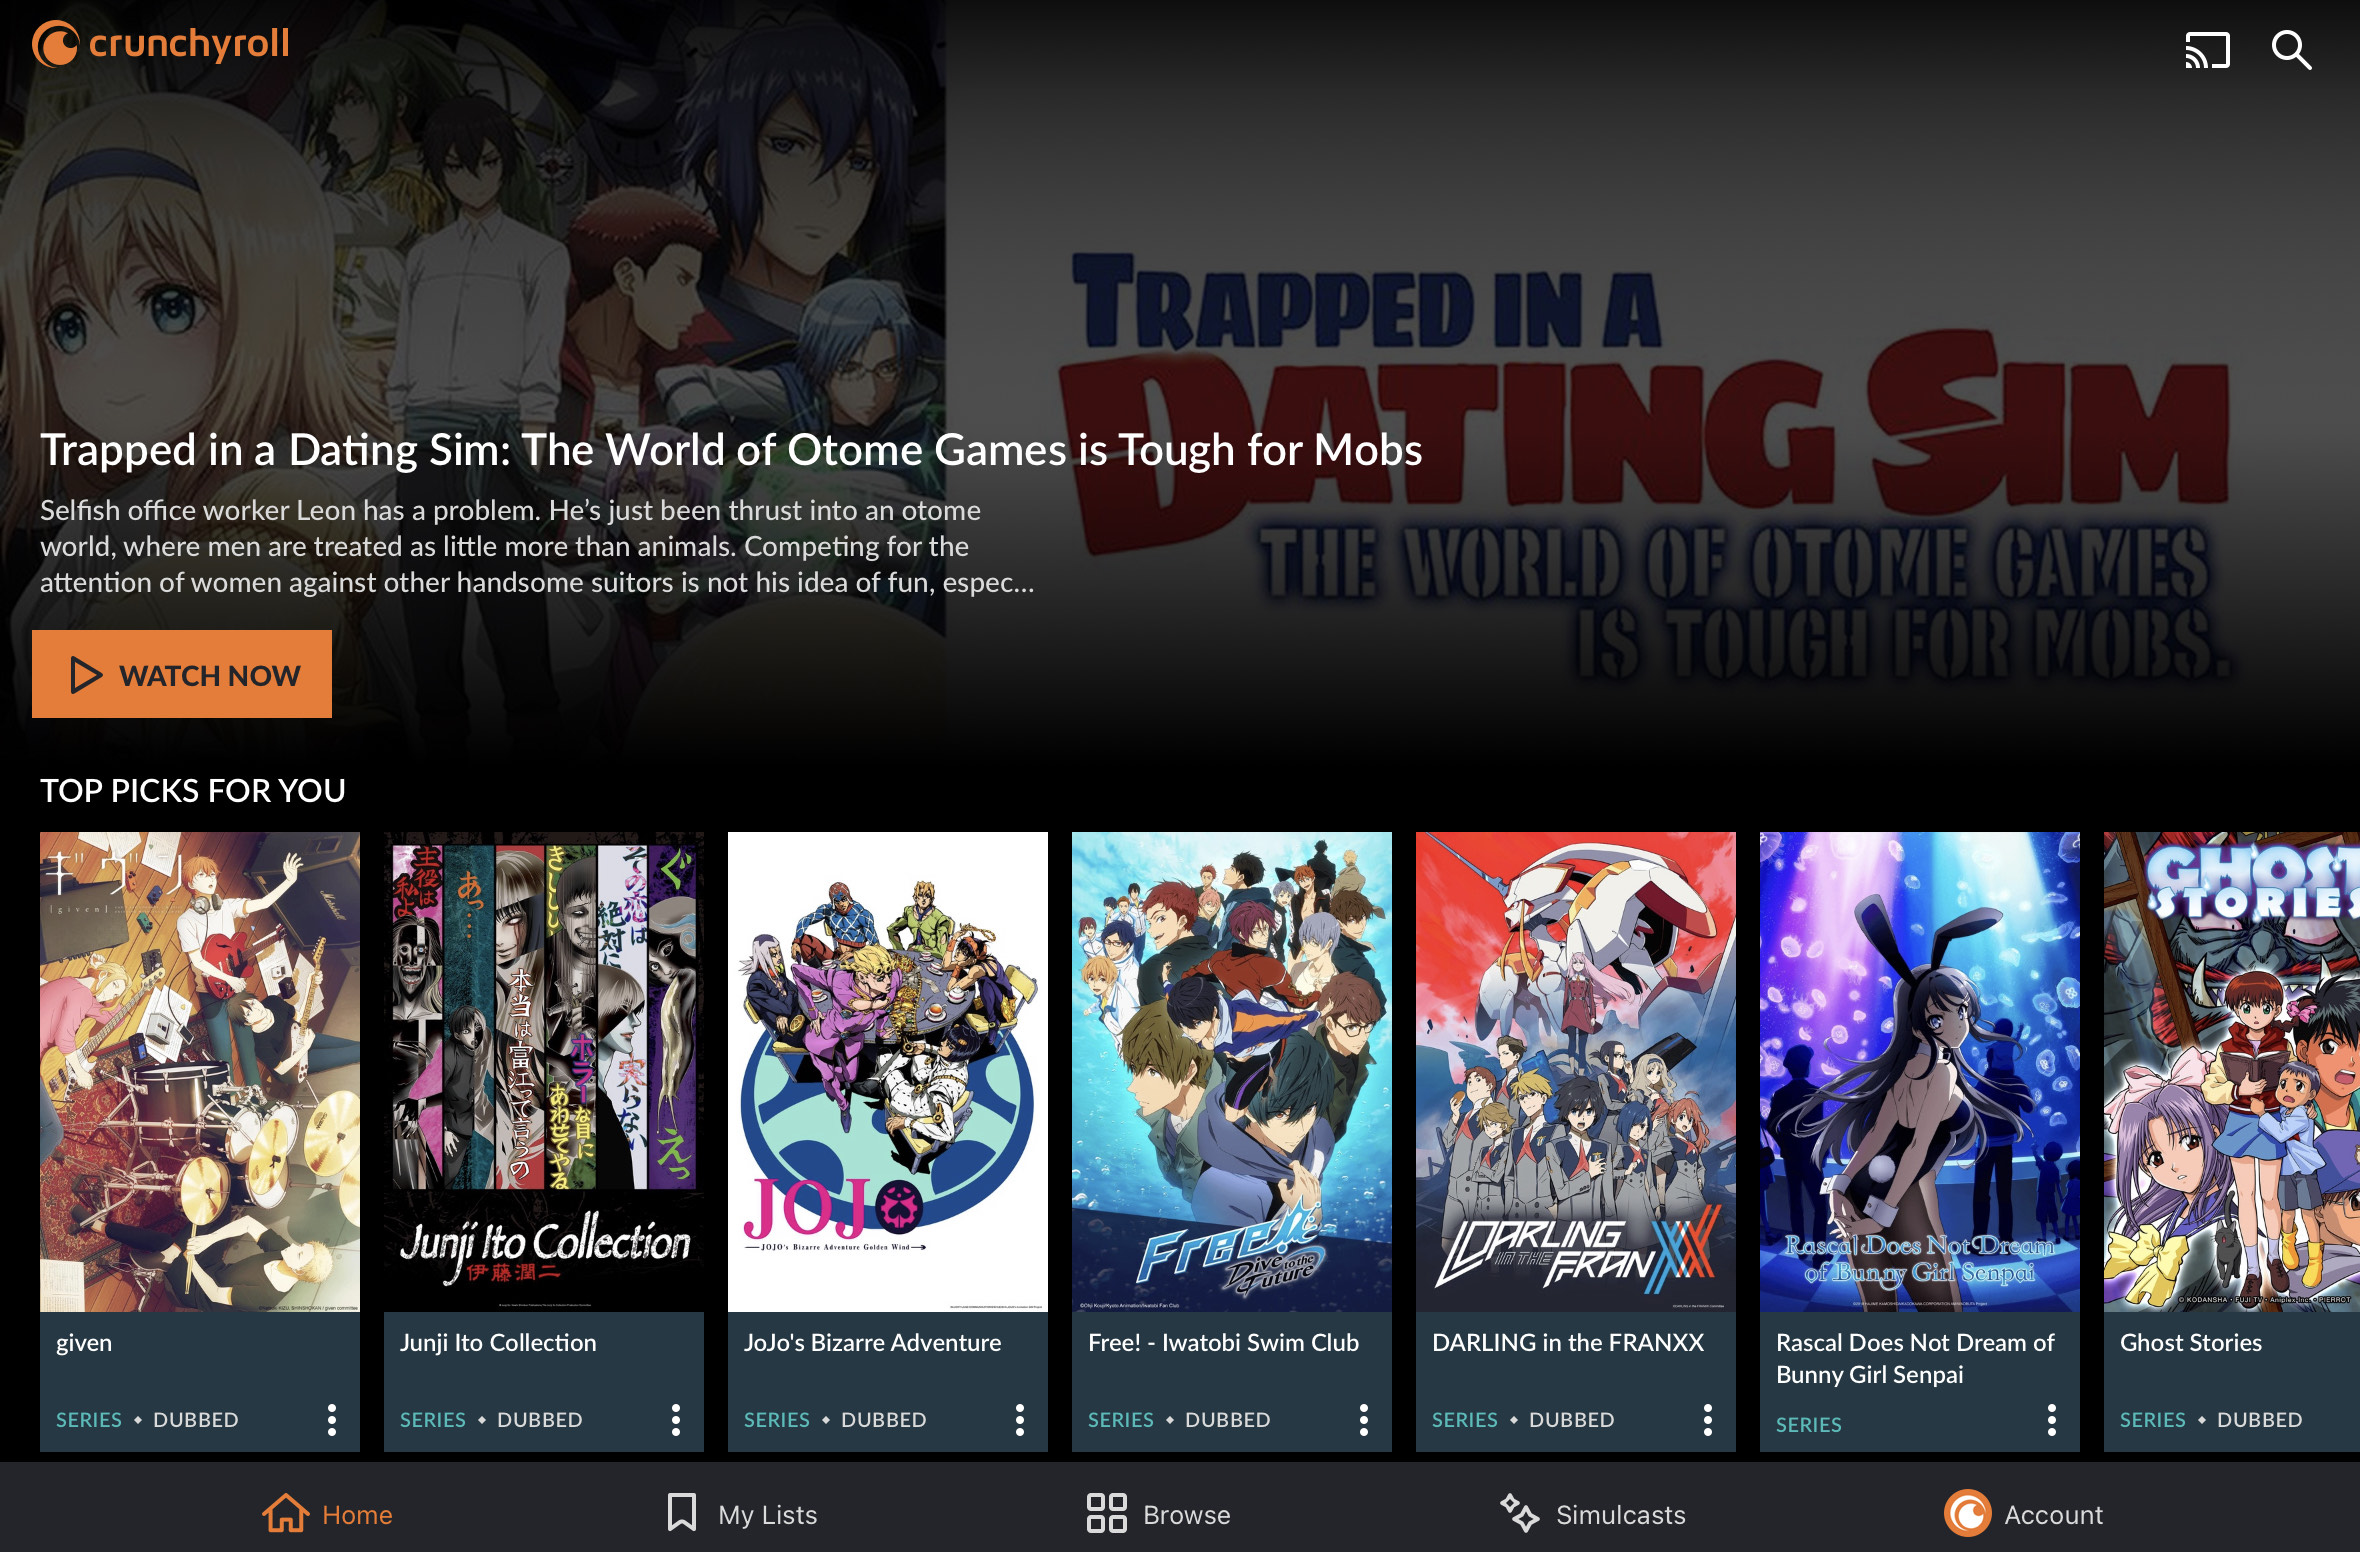 Crunchyroll says this anime is dubbed, but it's still in Japanese